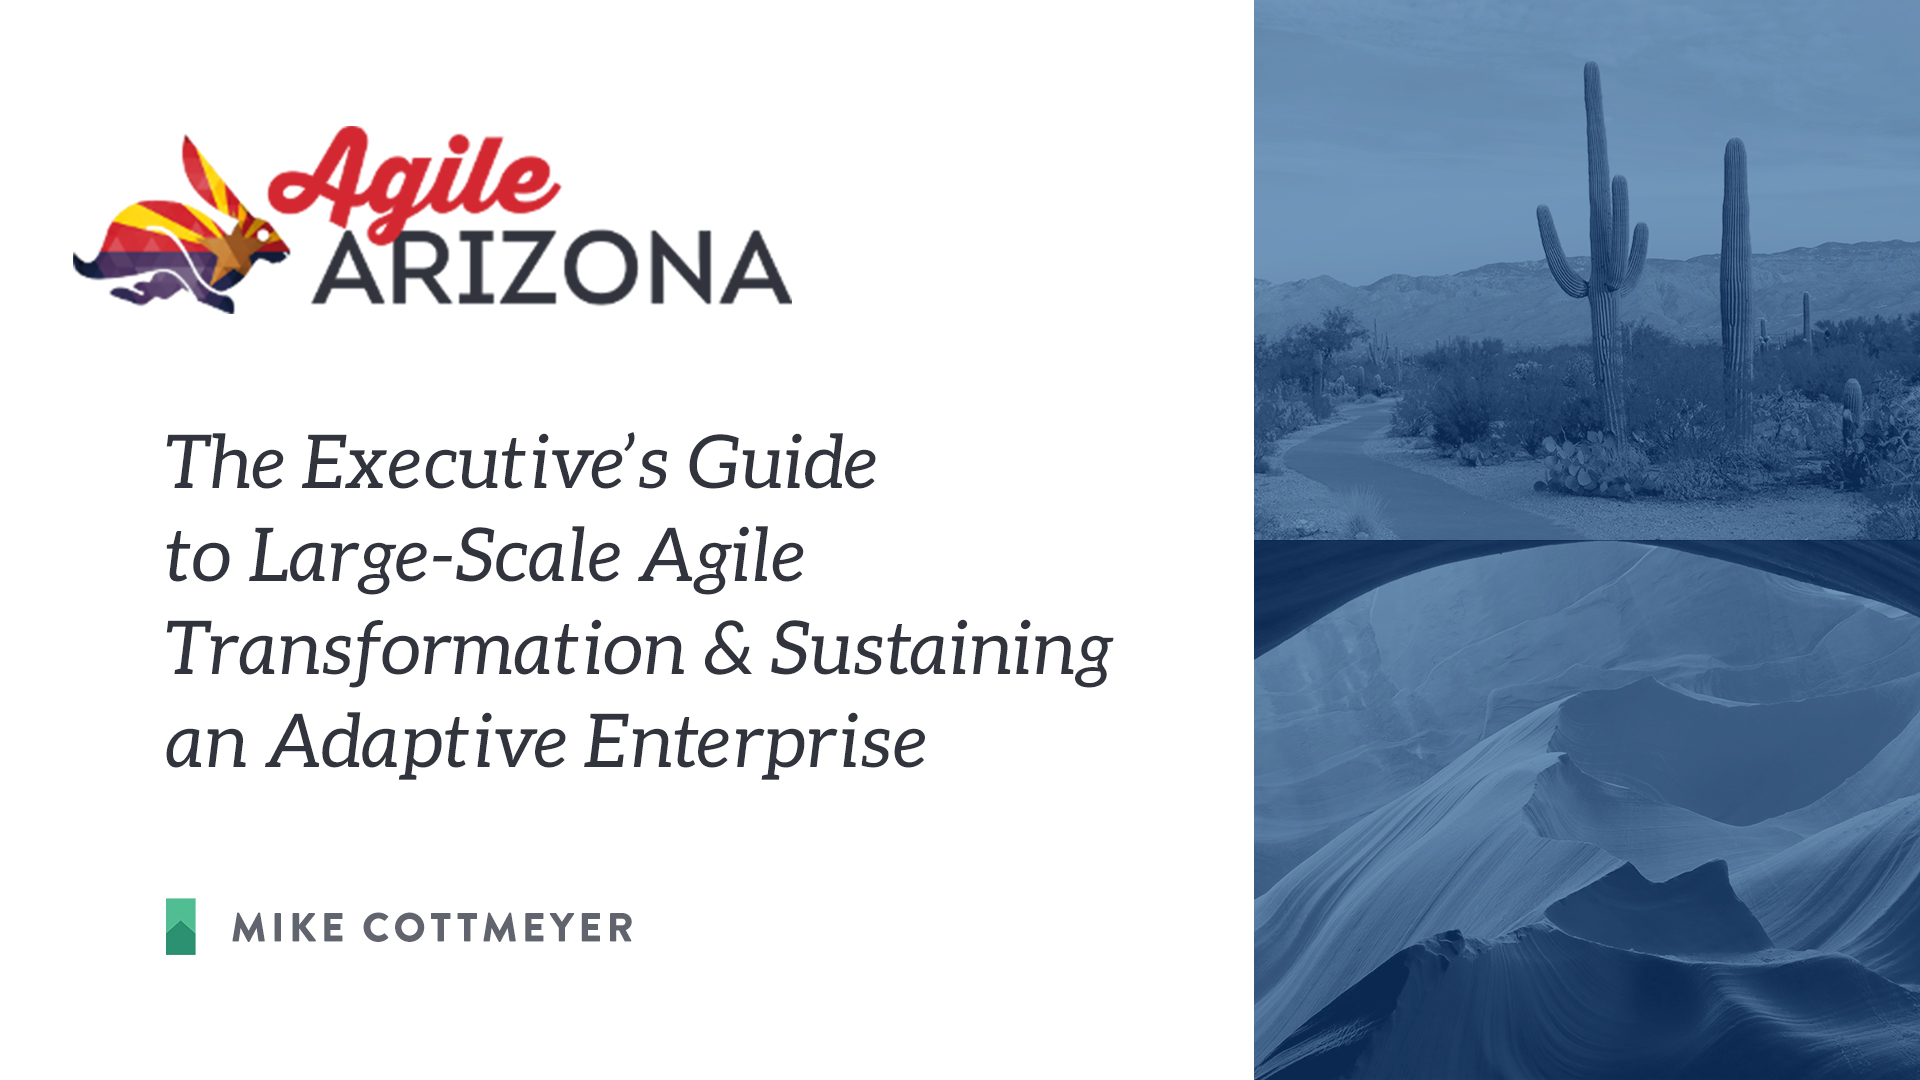  Executive’s Guide To Large-Scale Agile Transformation & Sustaining An Adaptive Enterprise w/ Mike Cottmeyer